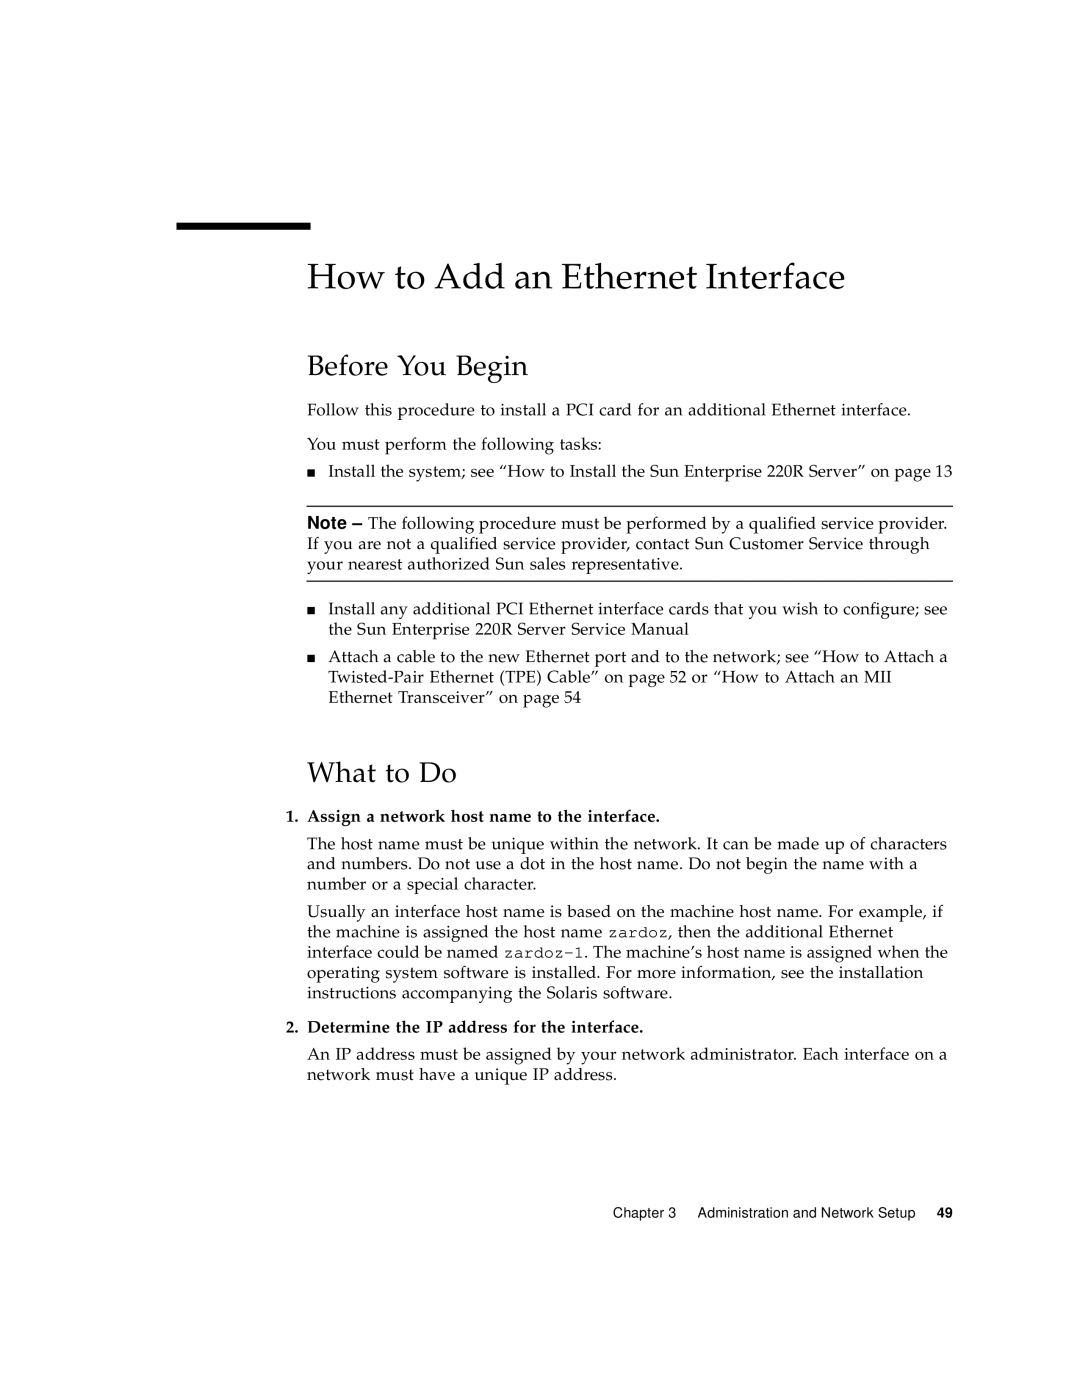 Sun Microsystems 220R How to Add an Ethernet Interface, Assign a network host name to the interface, Before You Begin 